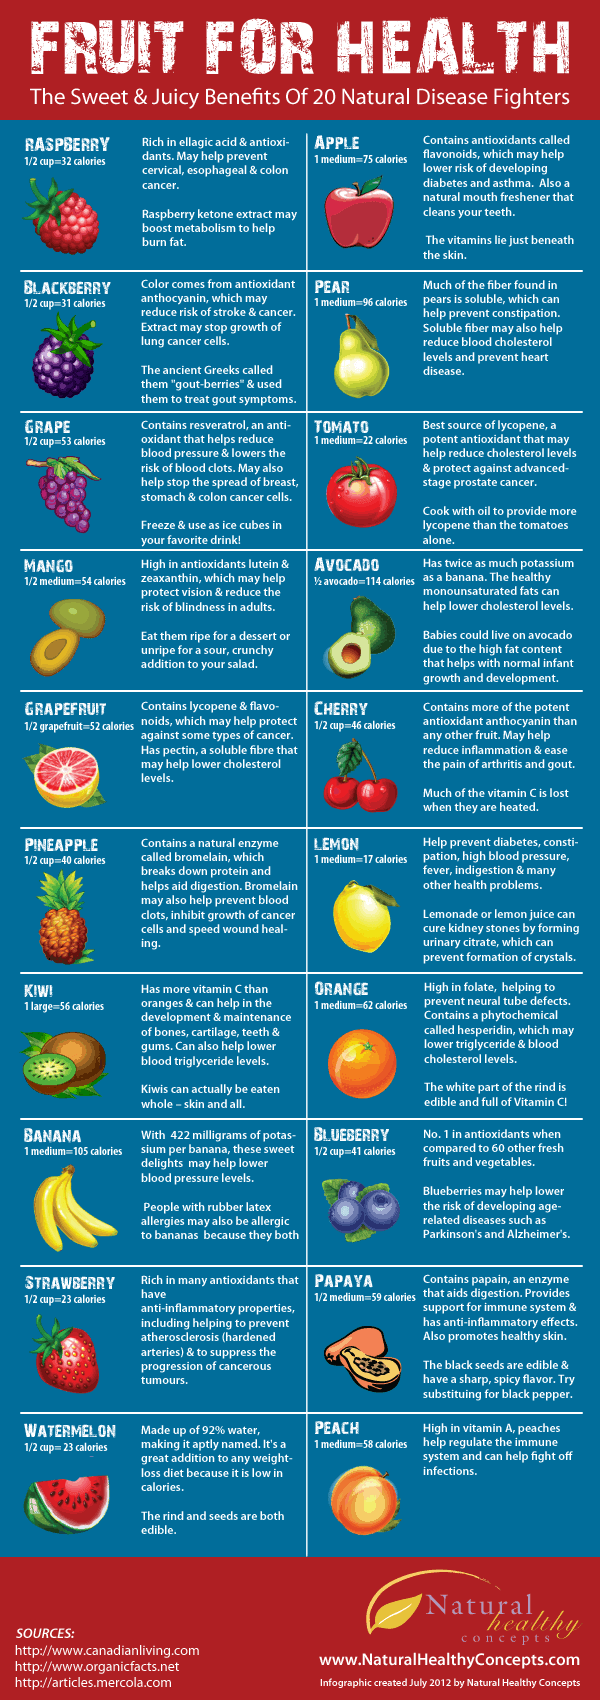 http://dailyinfographic.com/wp-content/uploads/2013/05/Fruit-For-Health_Infographic.png